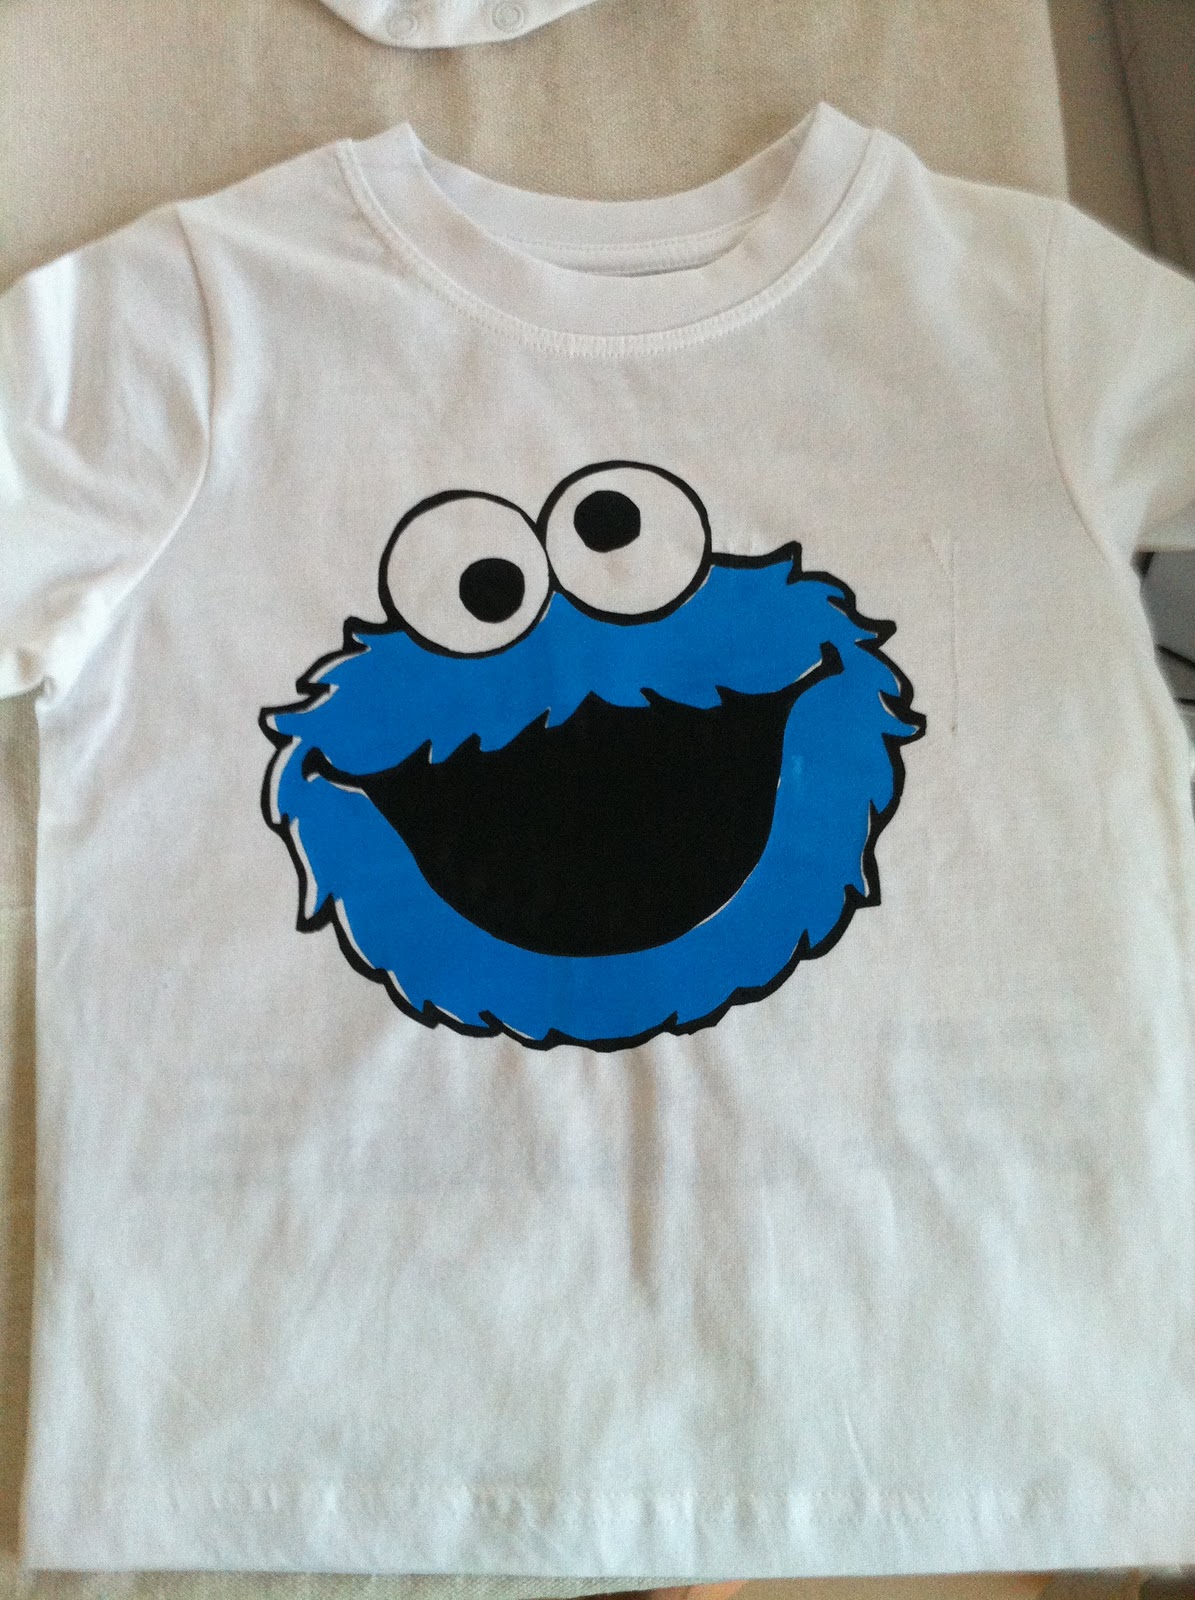 pritty tings: Cookie Monster tee for my little man.